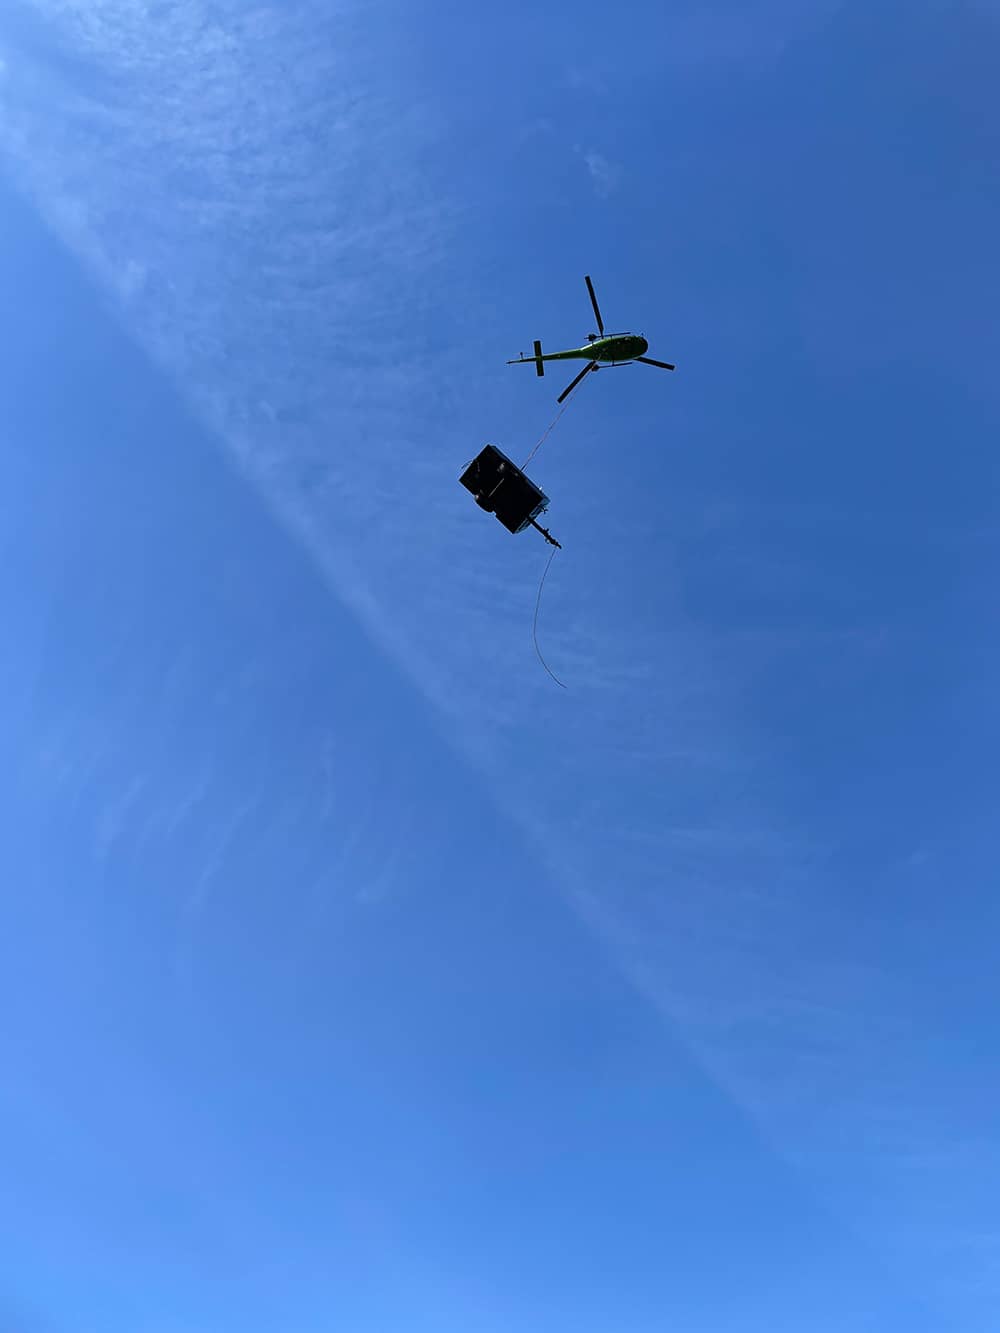 A photo of a helicopter transporting equipment for a remote access drill operation